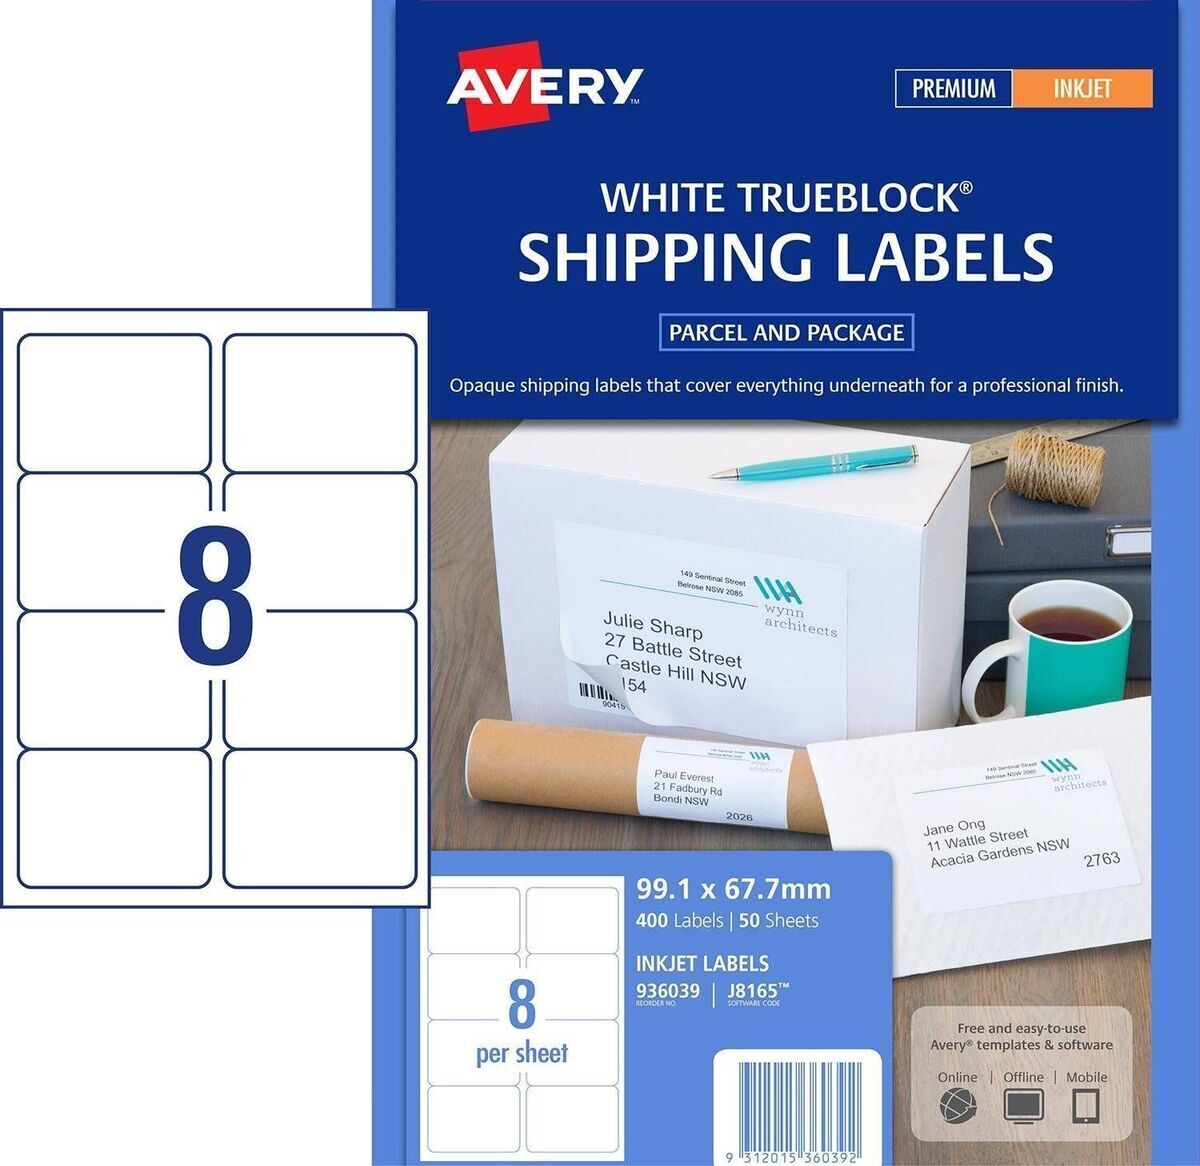 avery-936039-white-shipping-labels-with-trueblock-99-1mm-x-free-nude